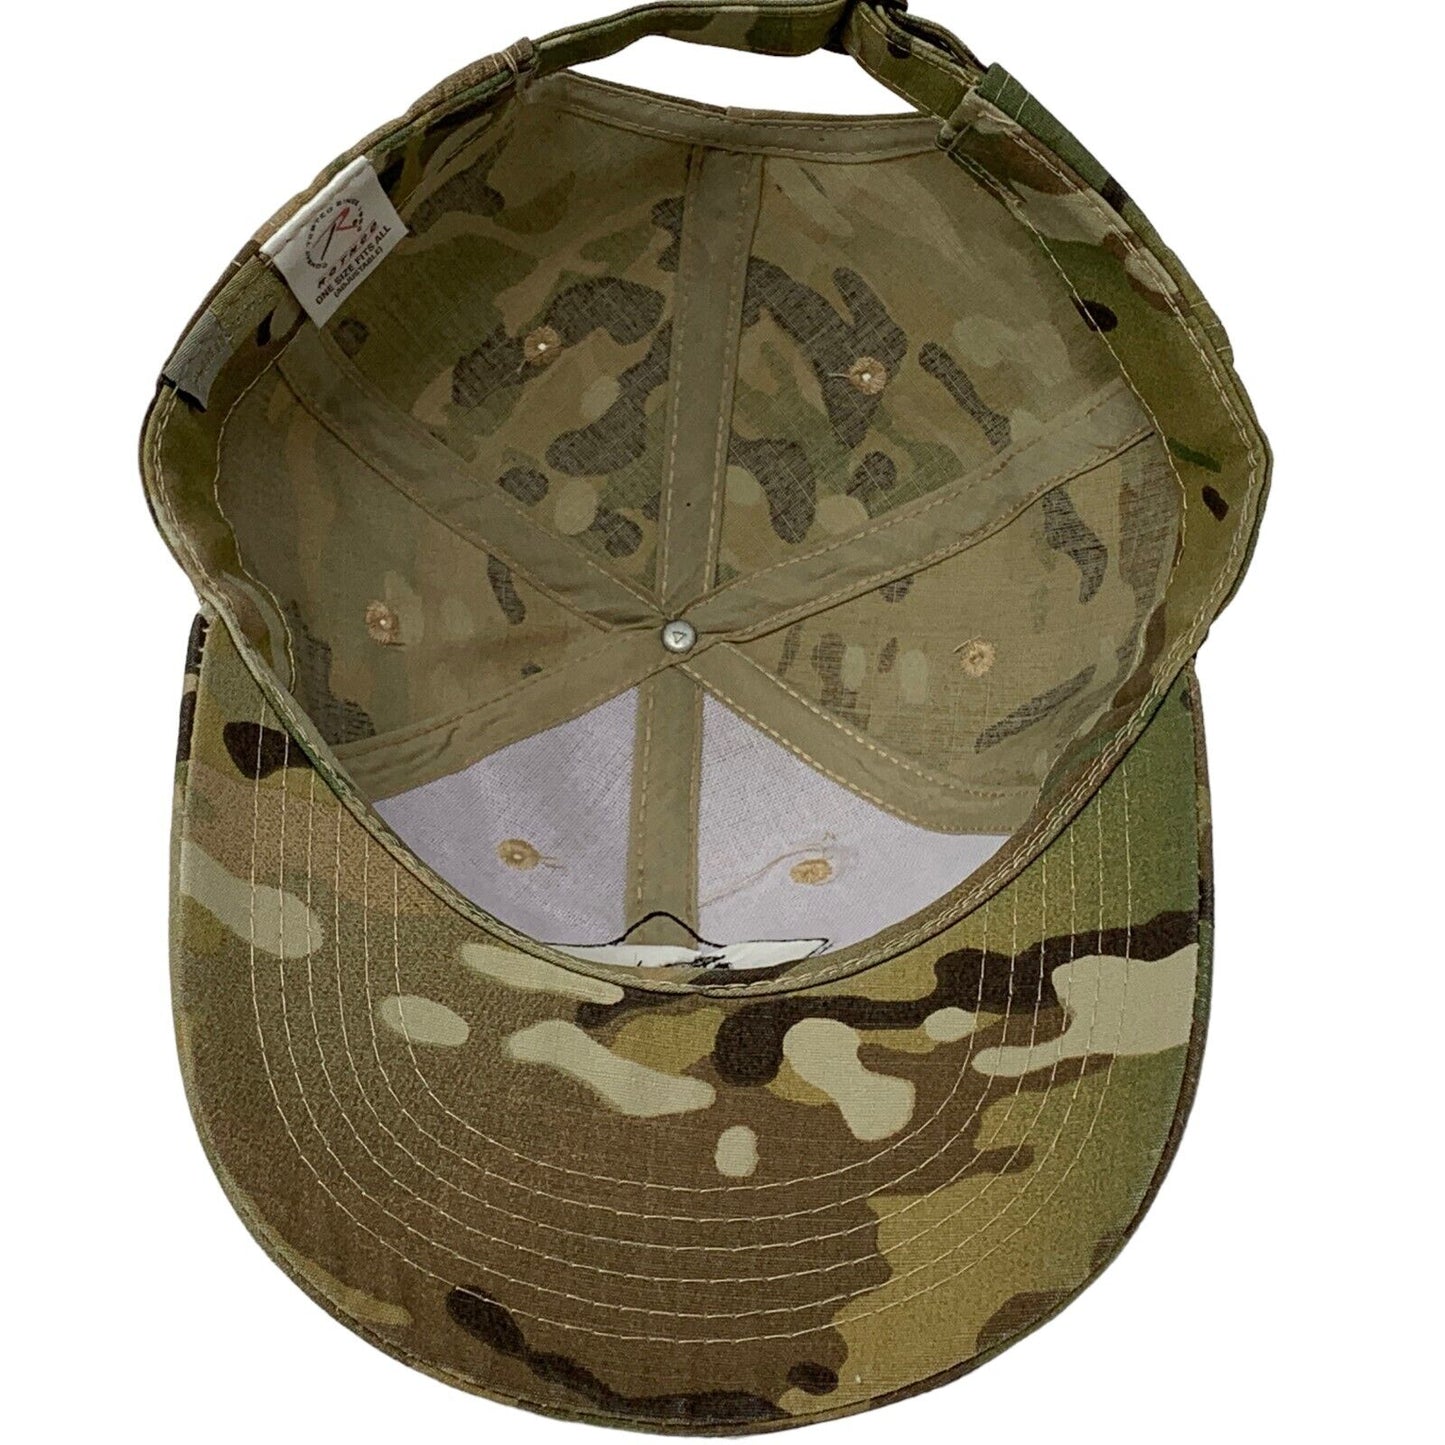 Boots On The Ground NY Camouflage Strapback Hat Military Veterans Baseball Cap